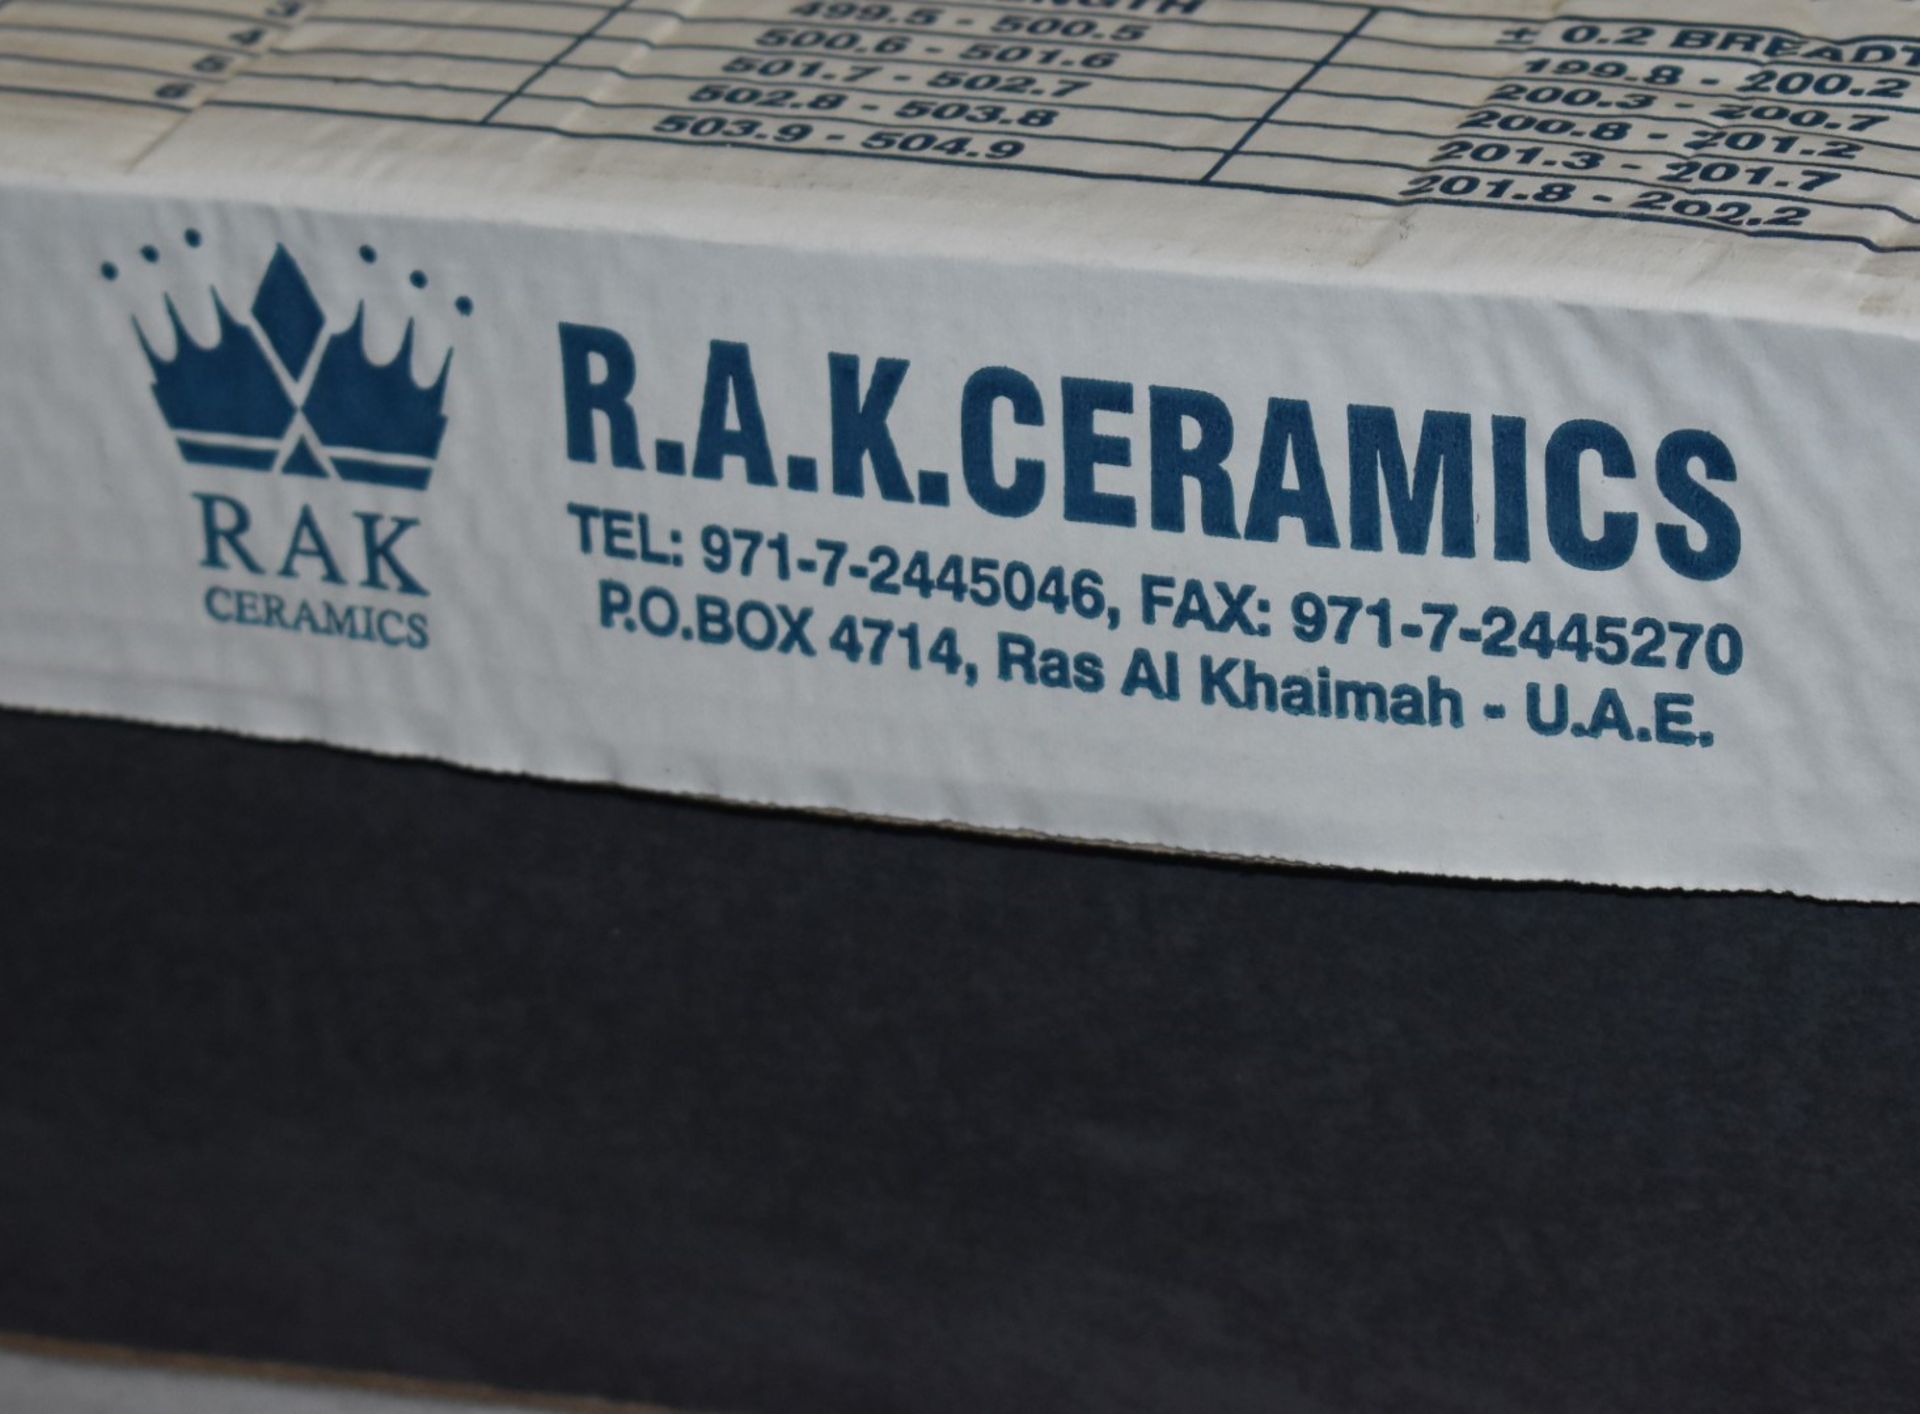 12 x Boxes of RAK Porcelain Floor or Wall Tiles - Dolomit Black - 20 x 50 cm Tiles Covering a - Image 6 of 9